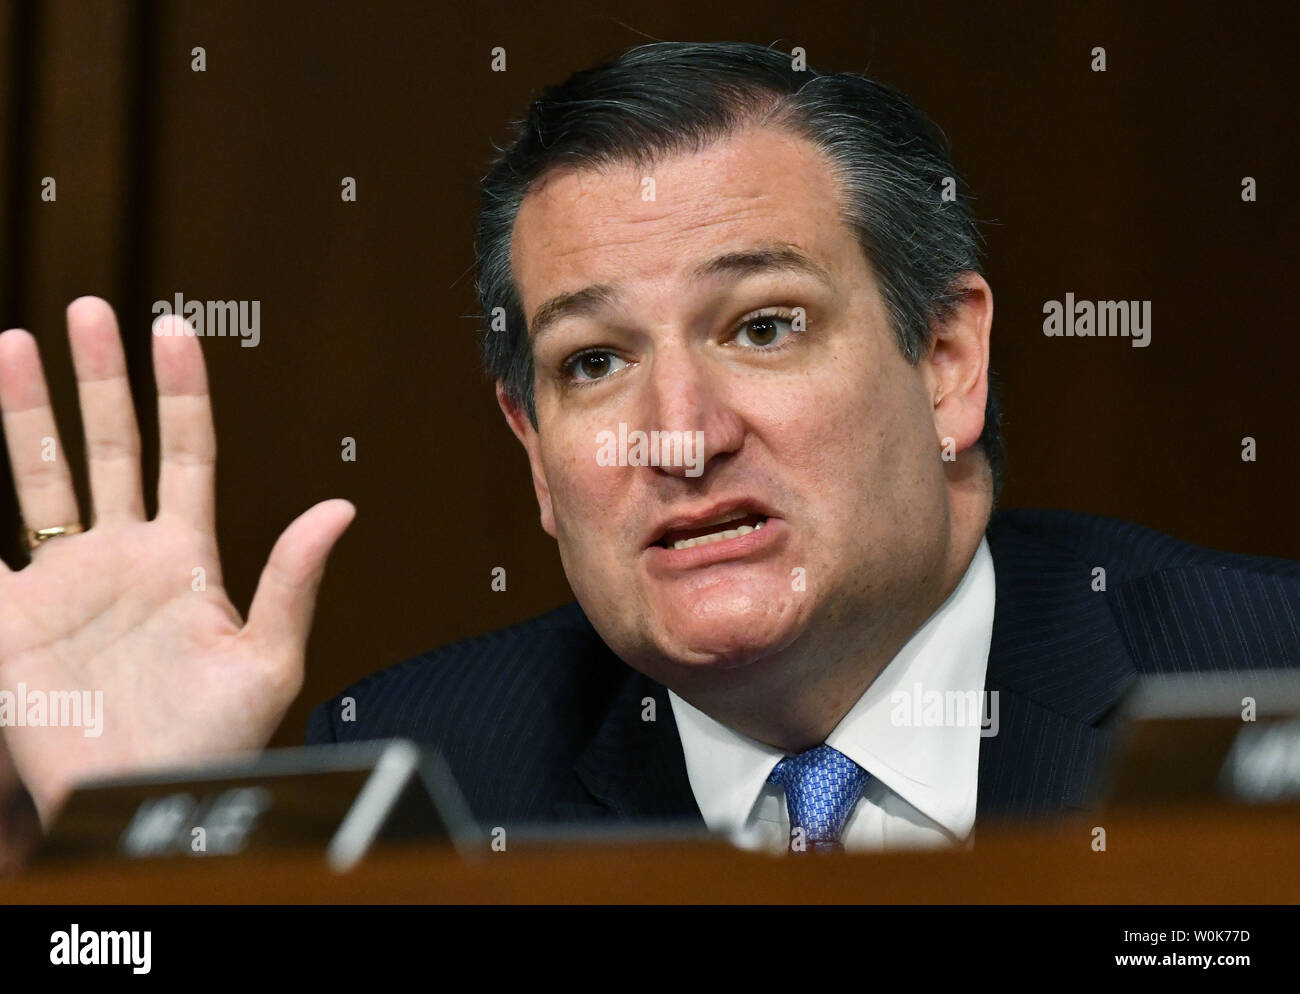 Sen. Ted Cruz, R-Tex., delivers his opening statement during the Judiciary Committee confirmation hearing for Supreme Court Justice nominee Brett M. Kavanaugh on Capitol Hill in Washington, DC on September 4, 2018. Judge Kavanaugh was nominated to fill the seat of Justice Anthony M. Kennedy who announced his retirement in June.  Photo by Pat Benic/UPI Stock Photo